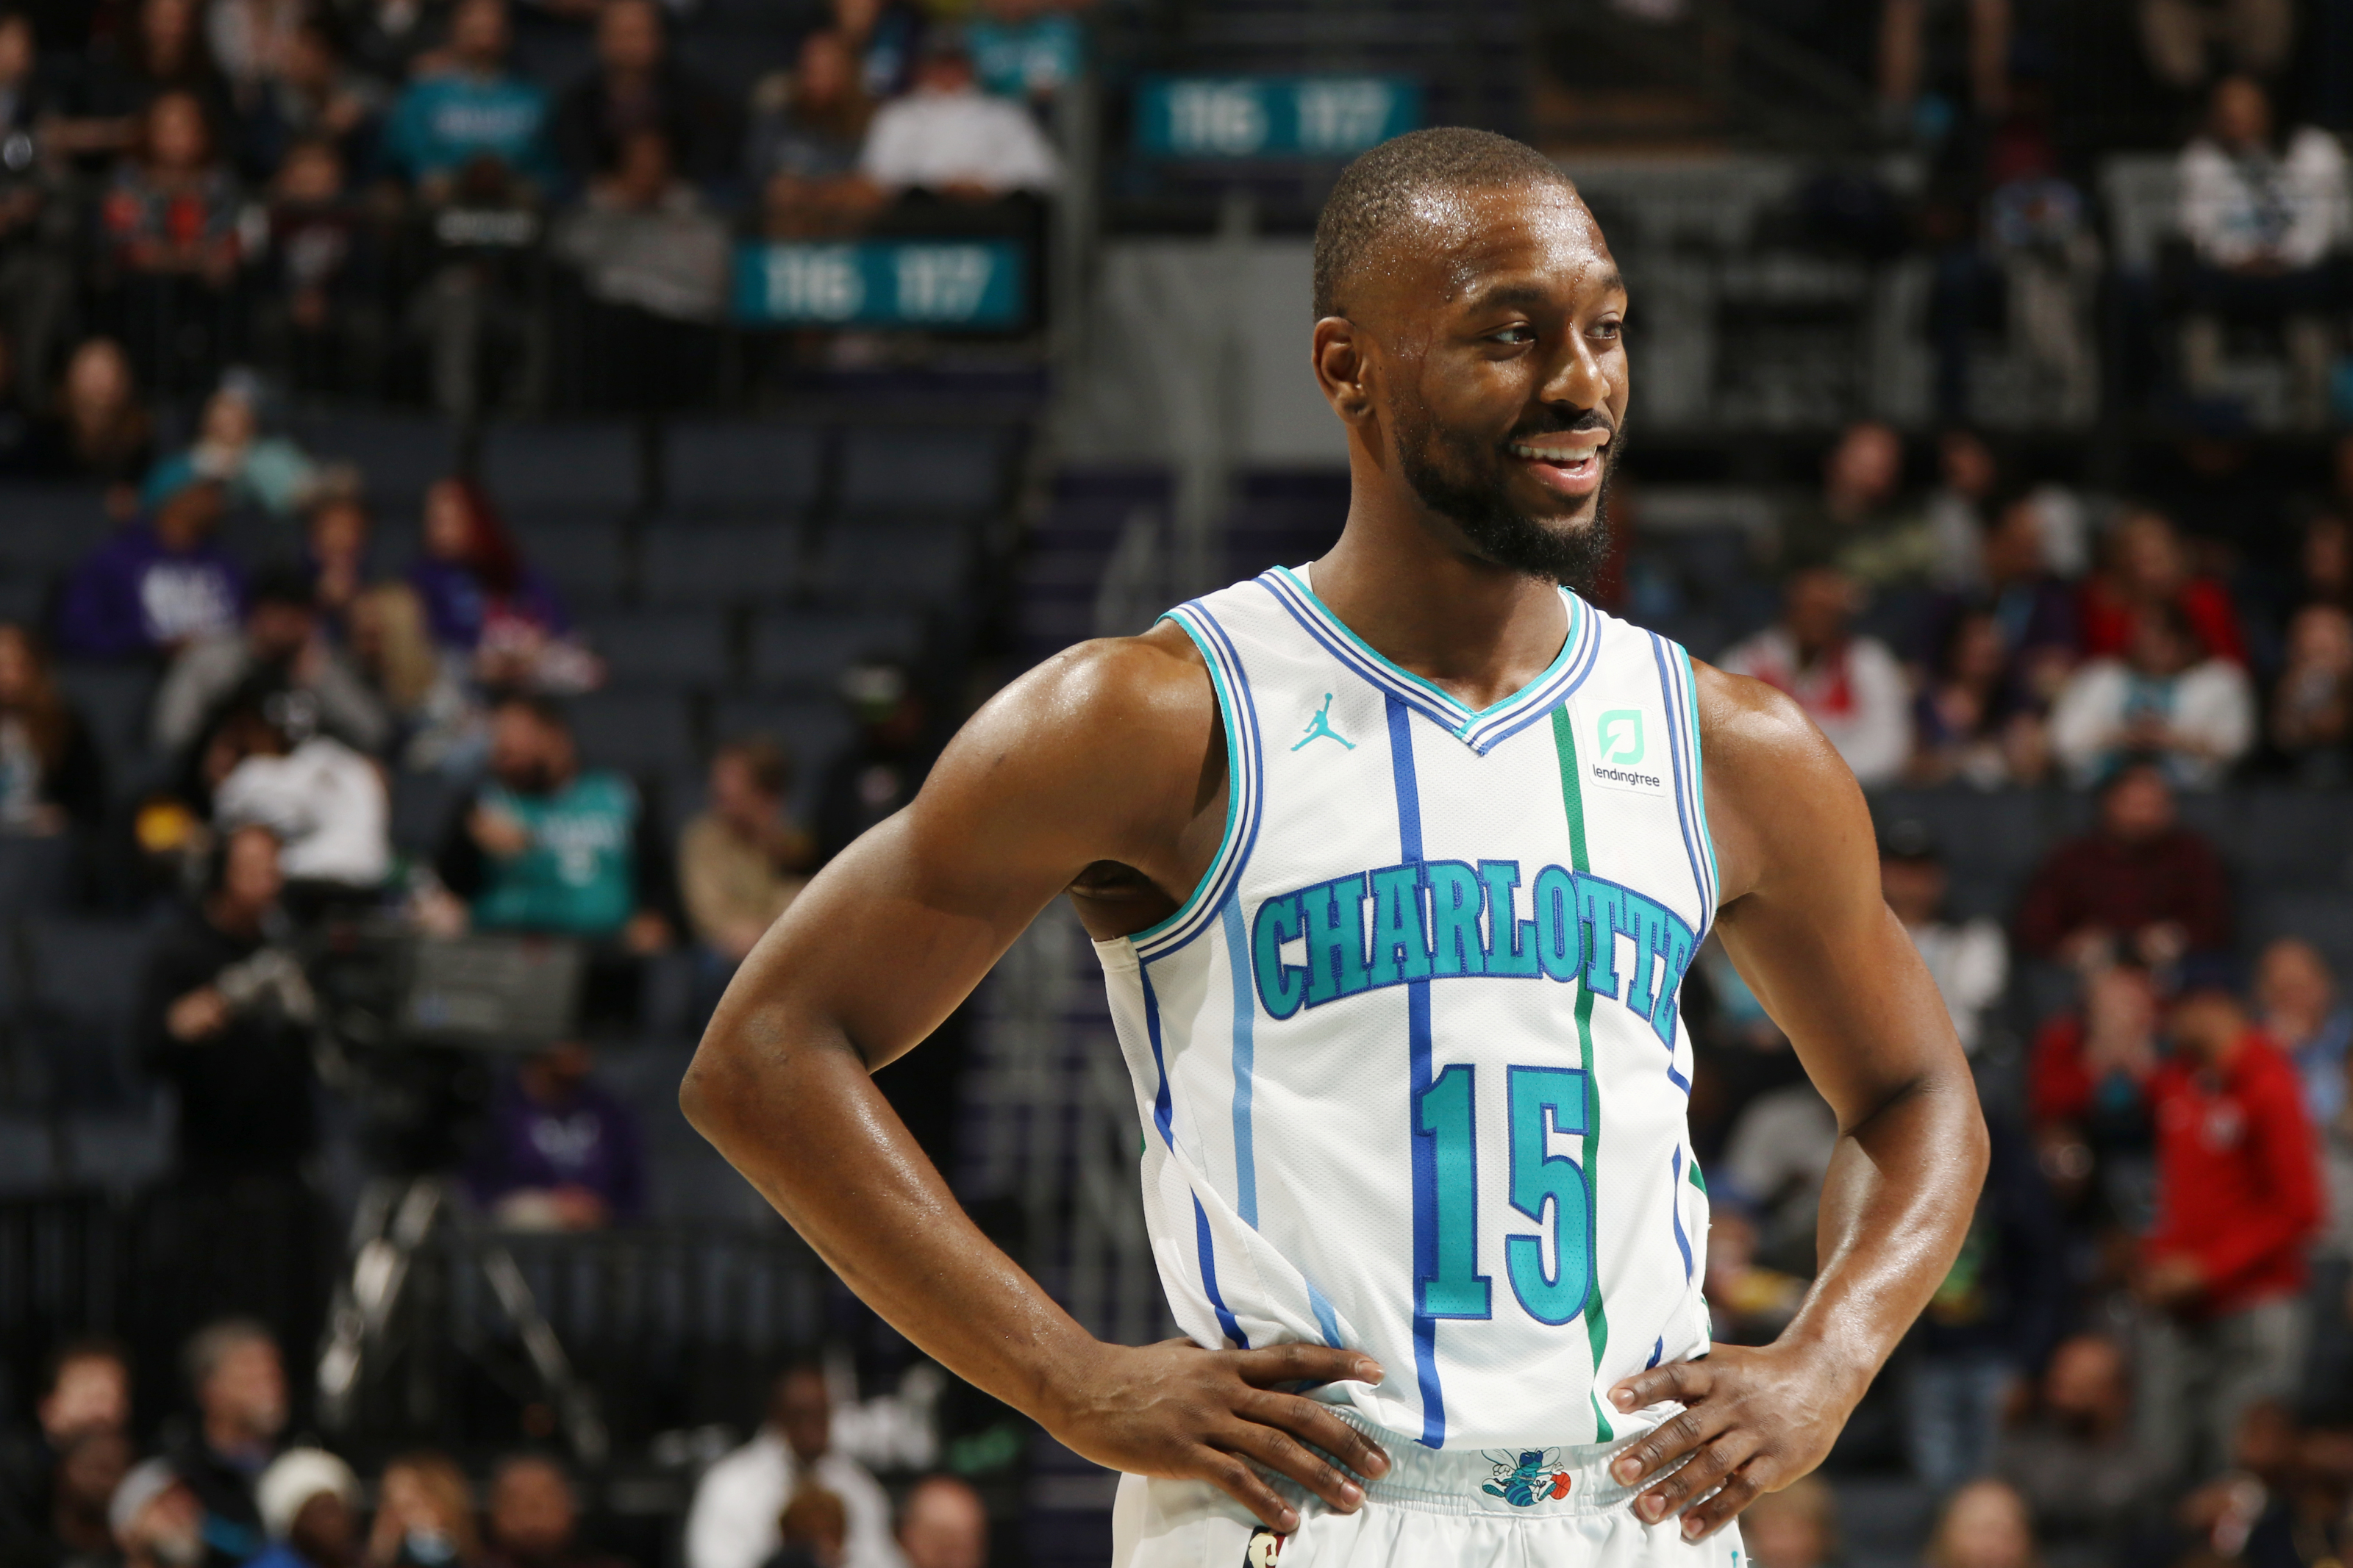 Why is Kemba Walker no longer the Knicks' starting point guard?